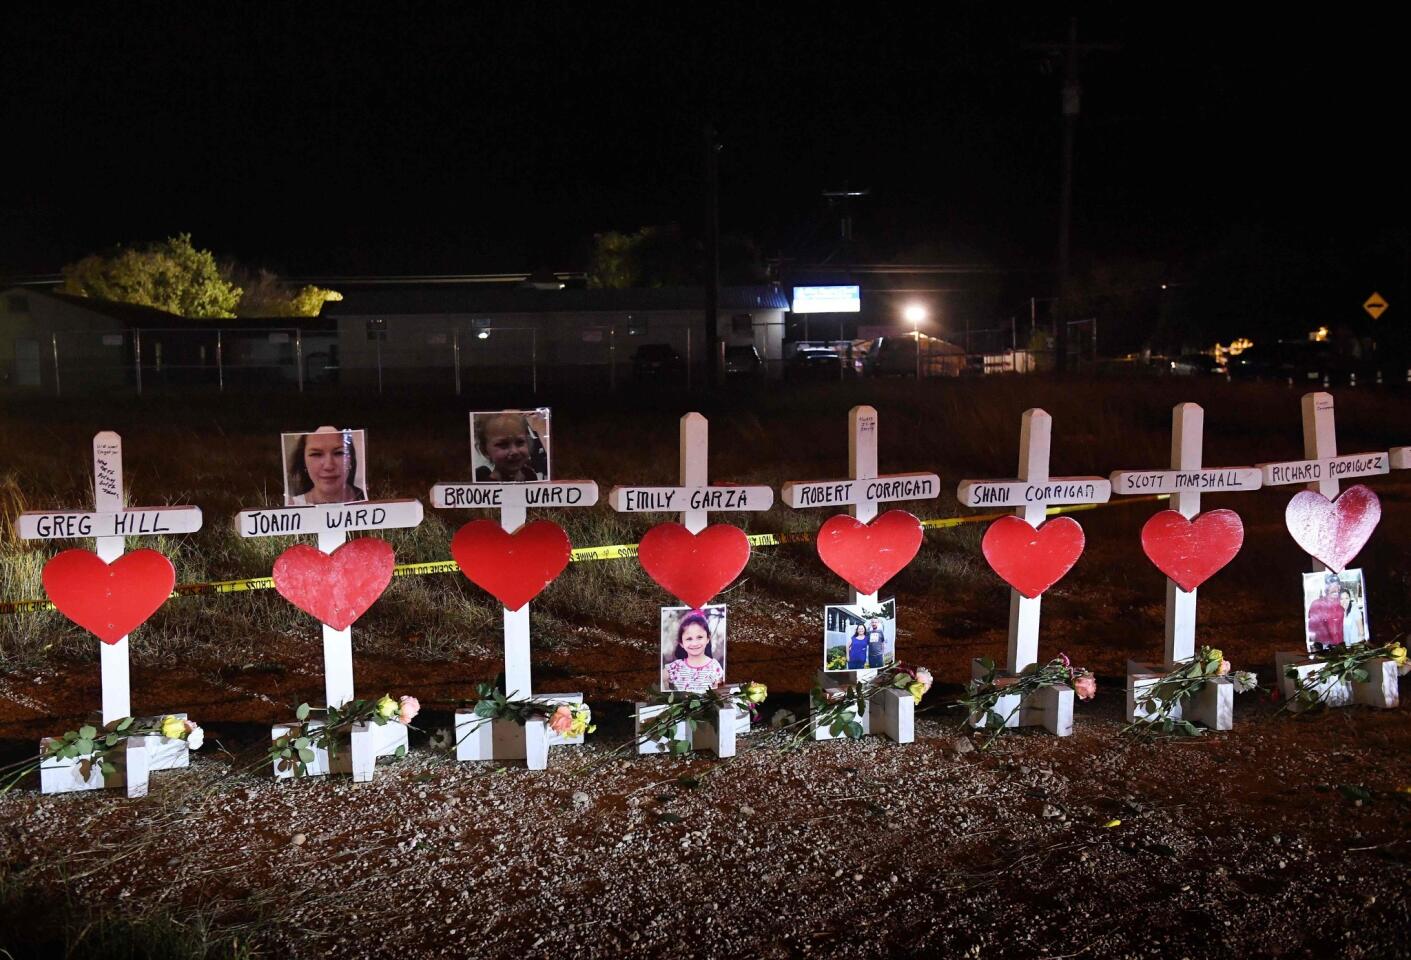 Crosses with the names of victims are seen outside the First Baptist Church, the scene of a mass shooting that killed 26 people in Sutherland Springs, Texas.